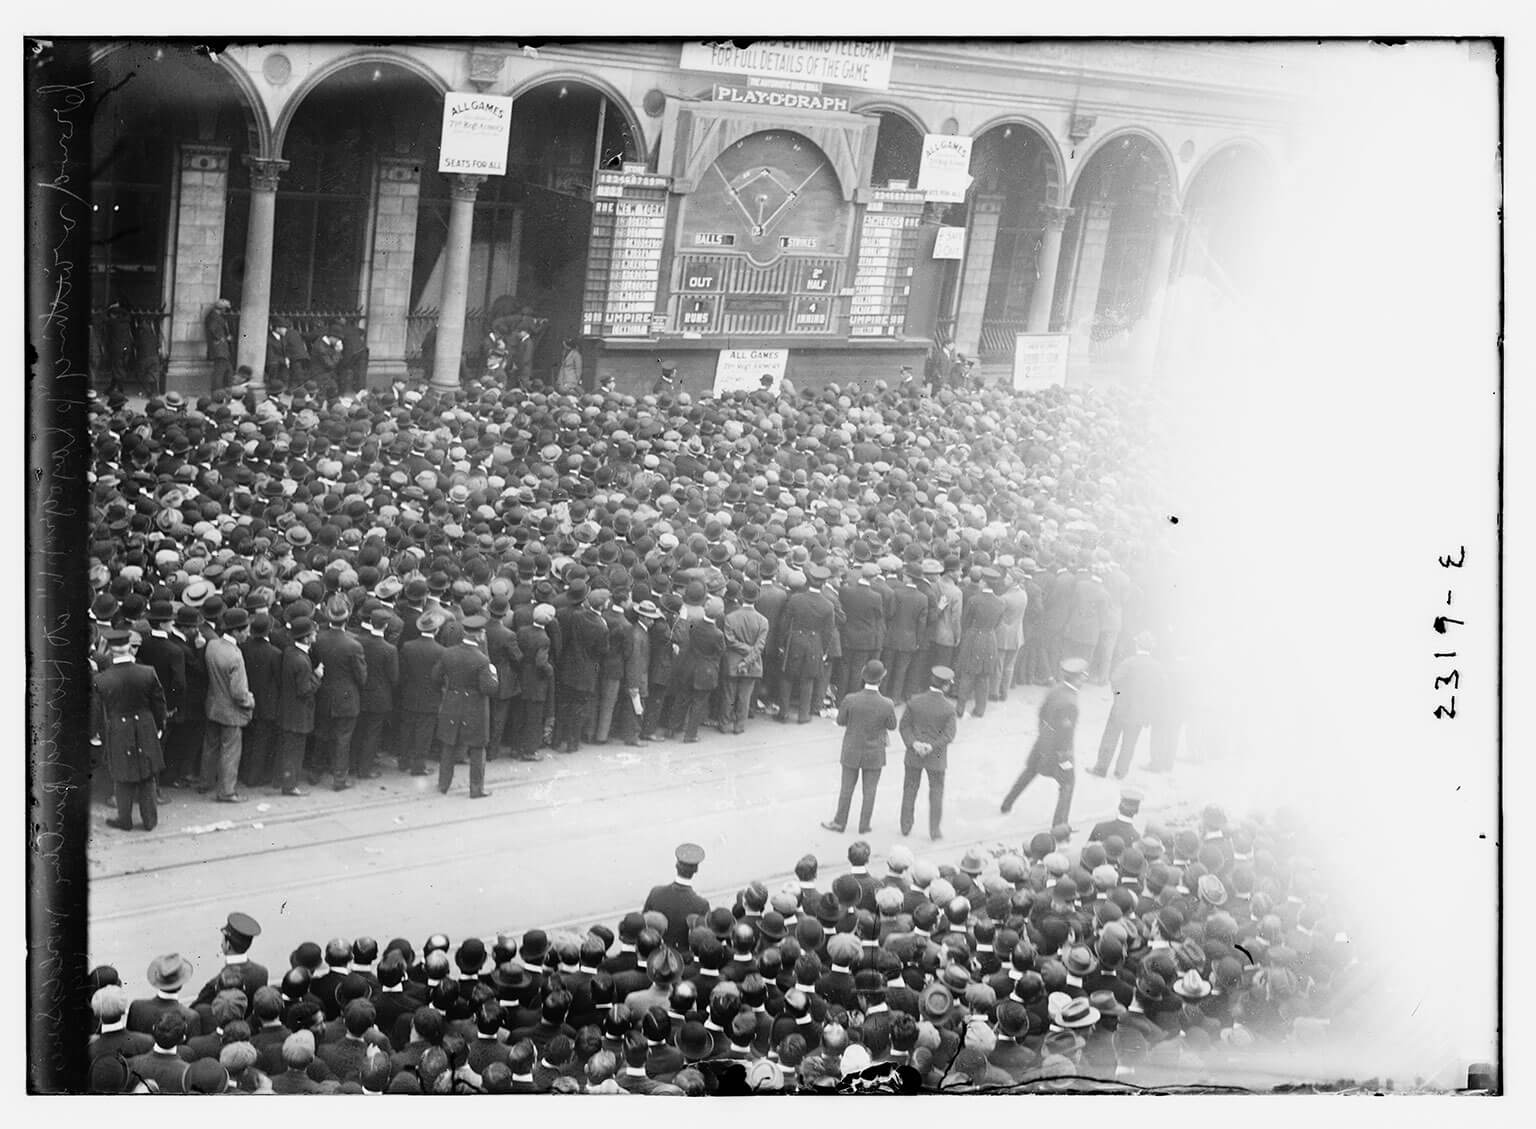 Fans following a 1911 World Series game on a "playograph" in NYC